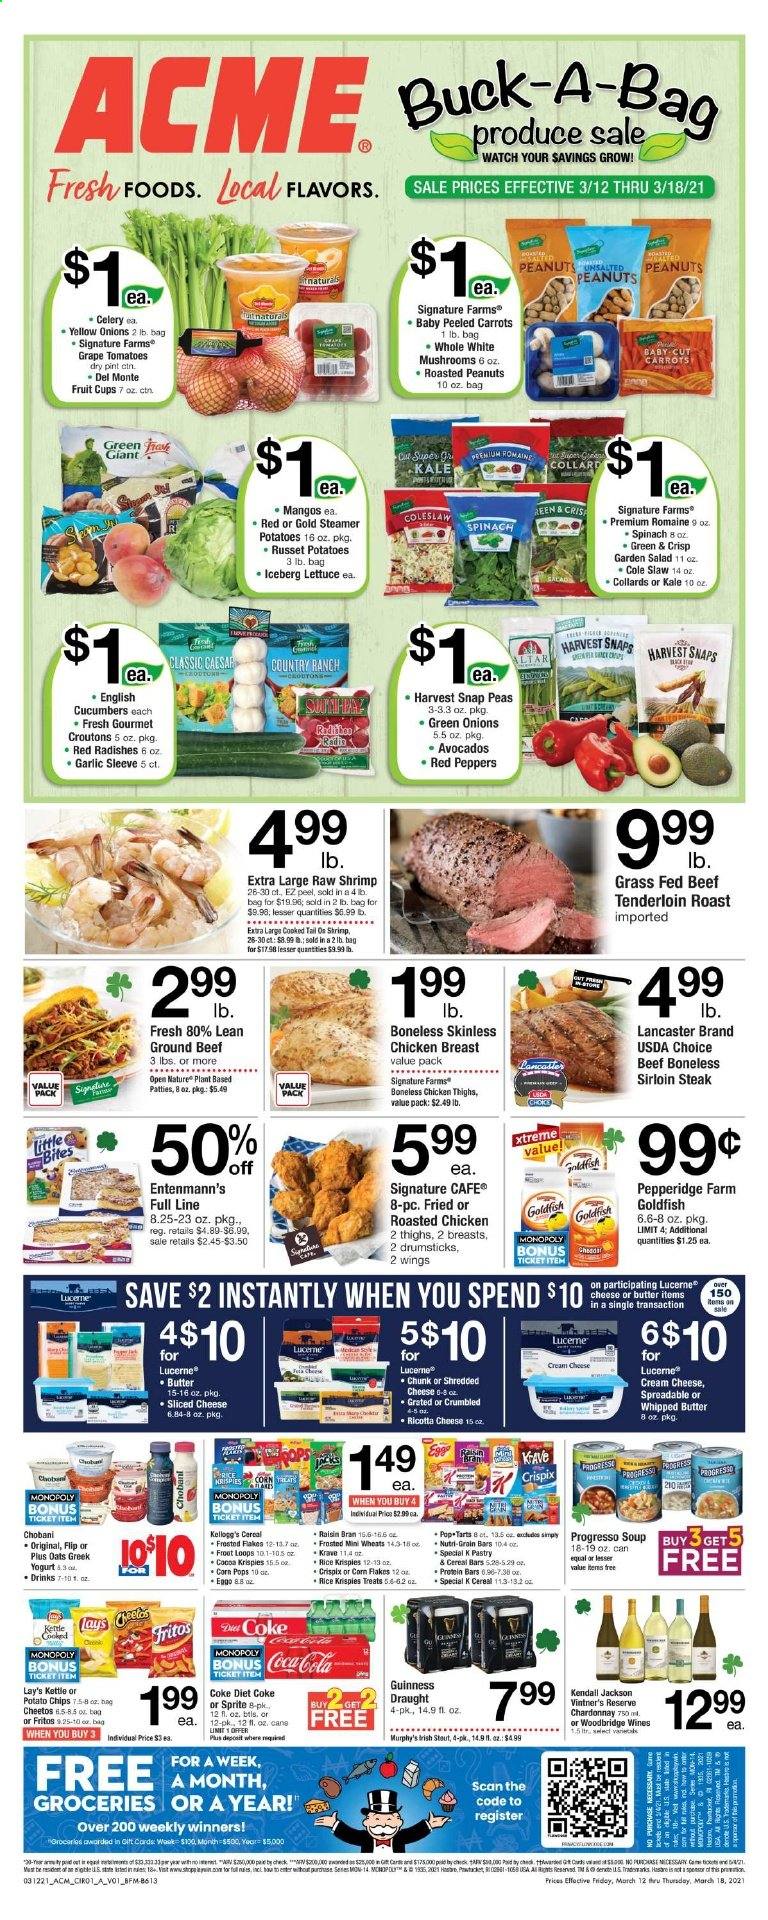 thumbnail - ACME Flyer - 03/12/2021 - 03/18/2021 - Sales products - mushrooms, fruit cup, Entenmann's, Little Bites, shrimps, cream cheese, coleslaw, salad, Progresso, ricotta, shredded cheese, sliced cheese, greek yoghurt, yoghurt, Chobani, whipped butter, carrots, mango, snap peas, spinach, peas, celery, collard greens, lettuce, cereal bar, Kellogg's, Pop-Tarts, croutons, potato chips, Cheetos, chips, Lay’s, Goldfish, Harvest Snaps, oats, cucumber, garlic, cereals, Fritos, corn flakes, protein bar, Rice Krispies, Raisin Bran, roasted peanuts, peanuts, Coca-Cola, Sprite, Diet Coke, Chardonnay, wine, Woodbridge, Guinness, chicken breasts, chicken thighs, beef meat, beef sirloin, ground beef, steak, beef tenderloin, sirloin steak, food steamer, watch, Monopoly. Page 1.